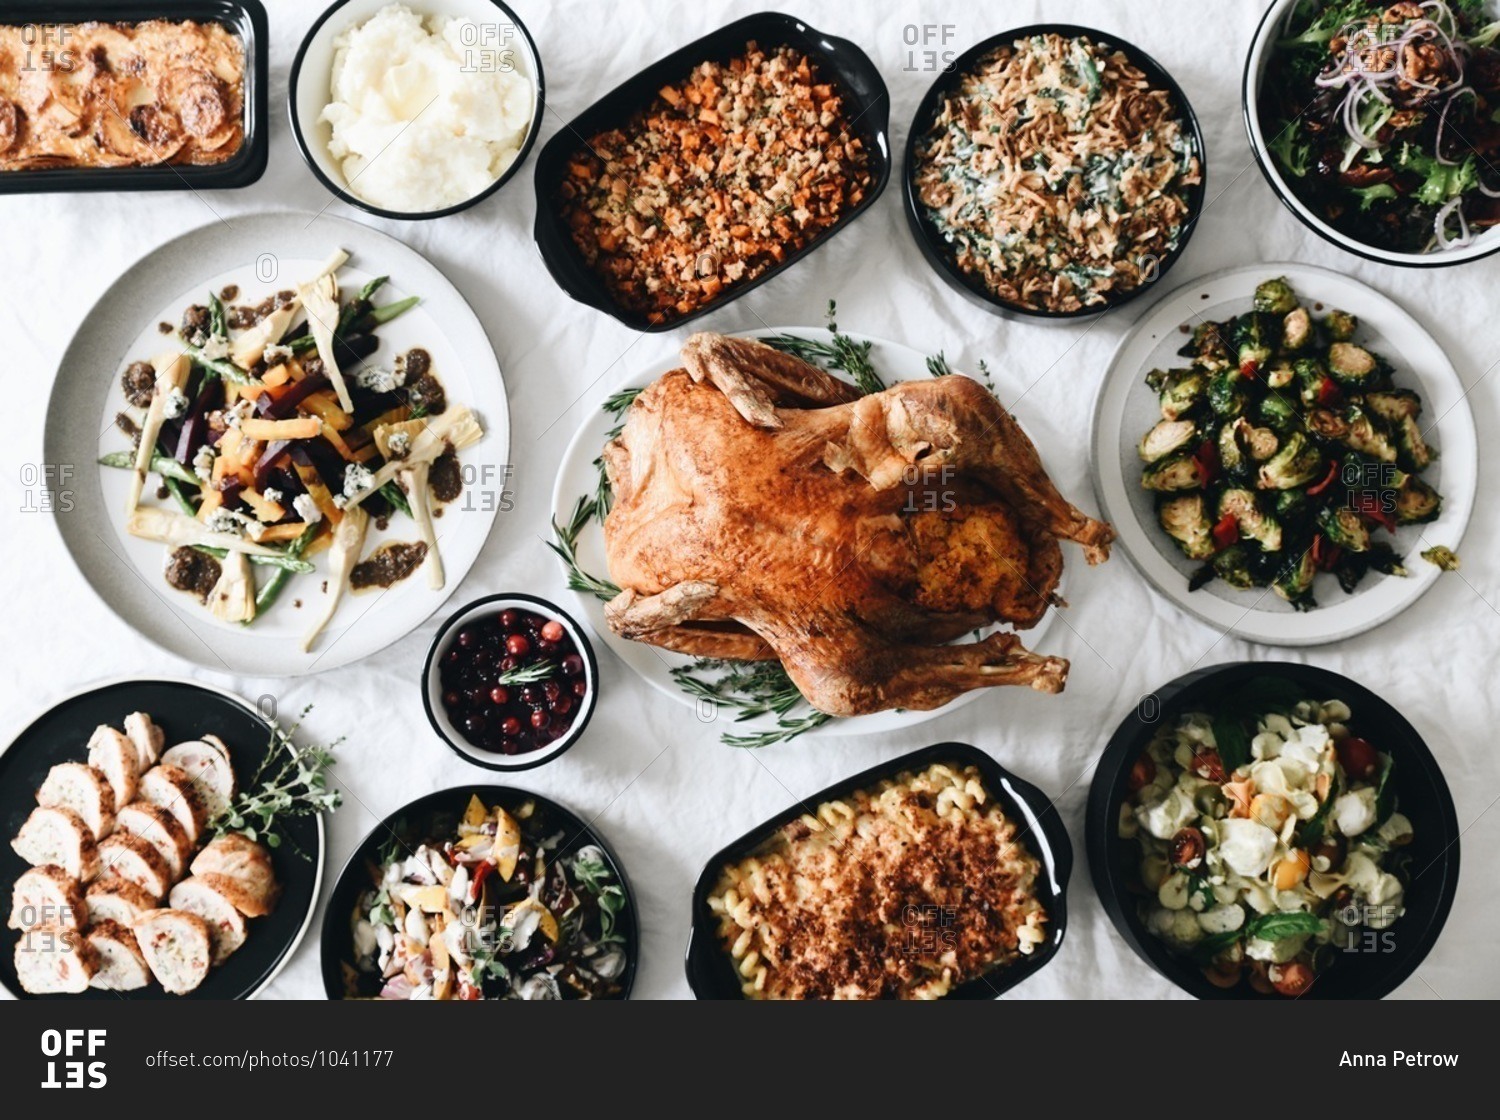 Top view of traditional Thanksgiving dinner food served on a table in front of a window